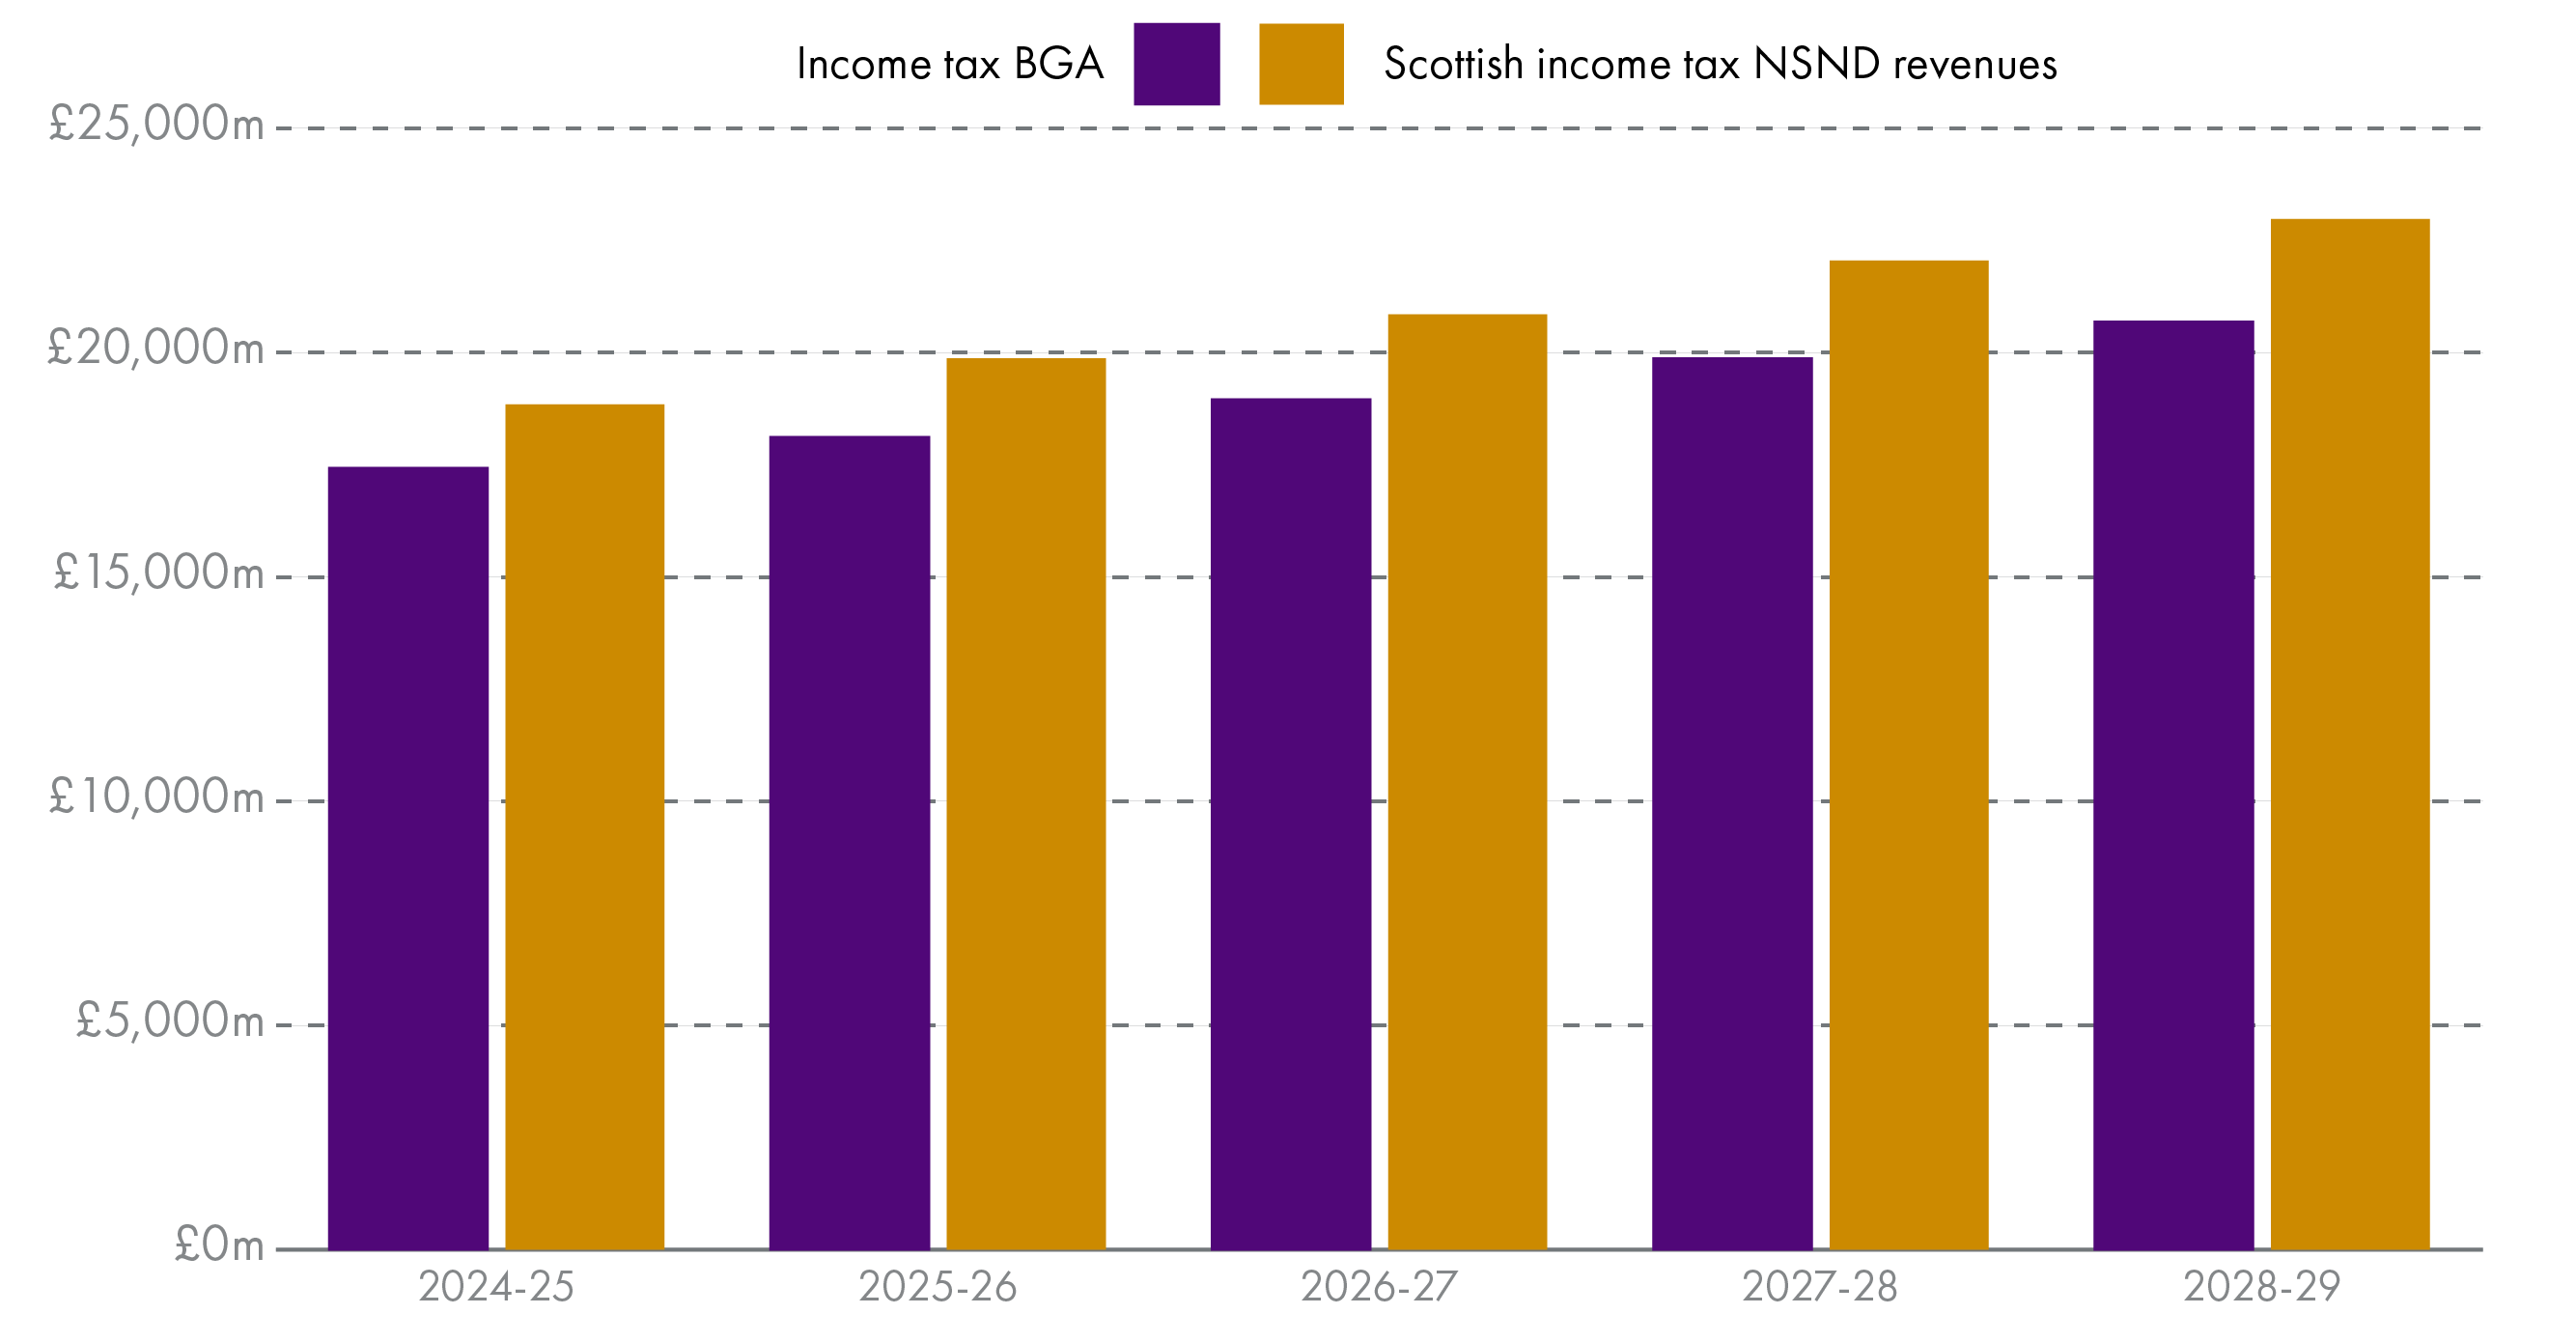 Chart showing income tax net position forecasts for 2024-25 to 2028-29. Latest Scottish Fiscal Commission forecasts show the gap between expected income tax revenues and the equivalent block grant adjustment widening from £1.4 billion in 2024-25 to £2.3 billion in 2028-29.